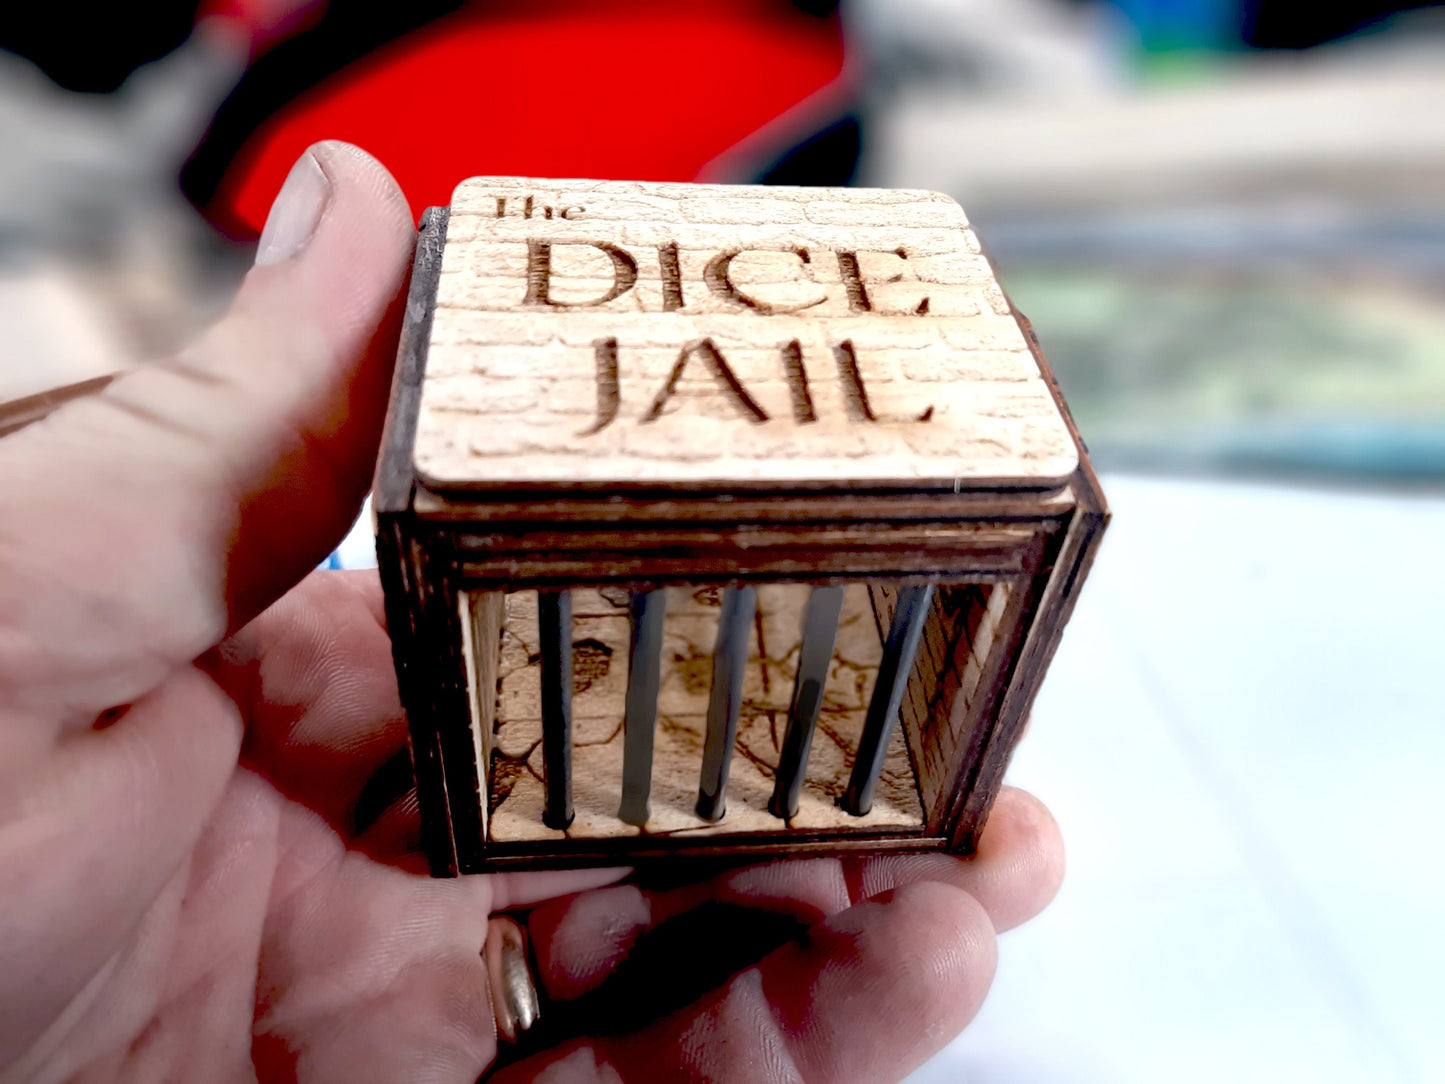 Dice Jail - Role Playing Tabletop Game Accessory with Steel Bars- Dungeons and Dragons gift - Dice Purgatory - D&D